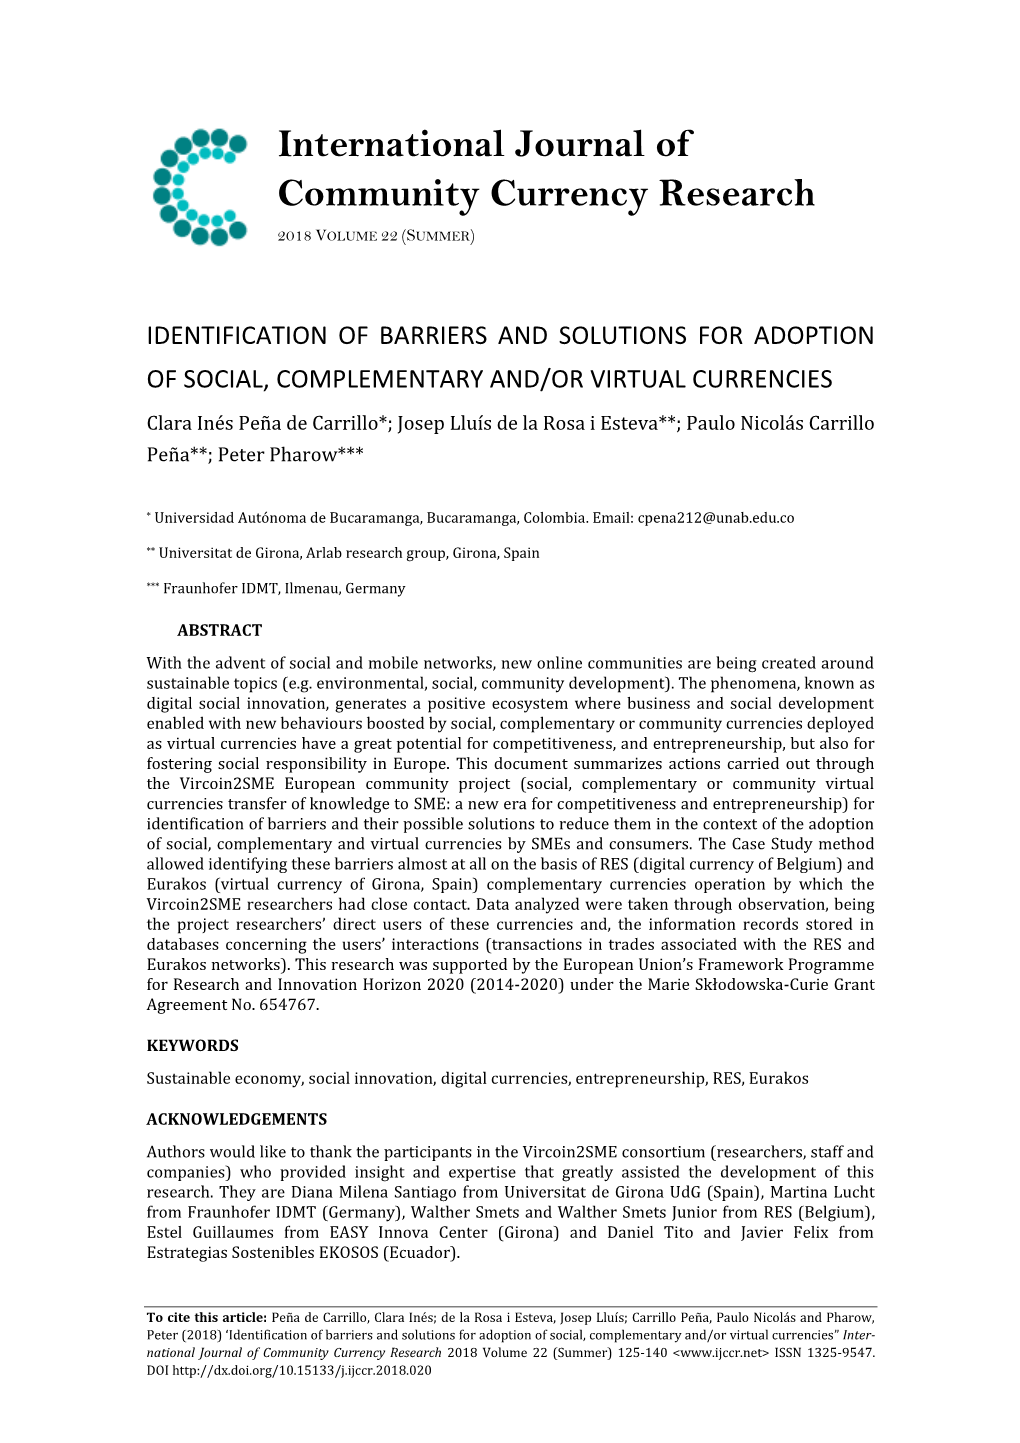 Identification of Barriers and Solutions for Adoption of Social